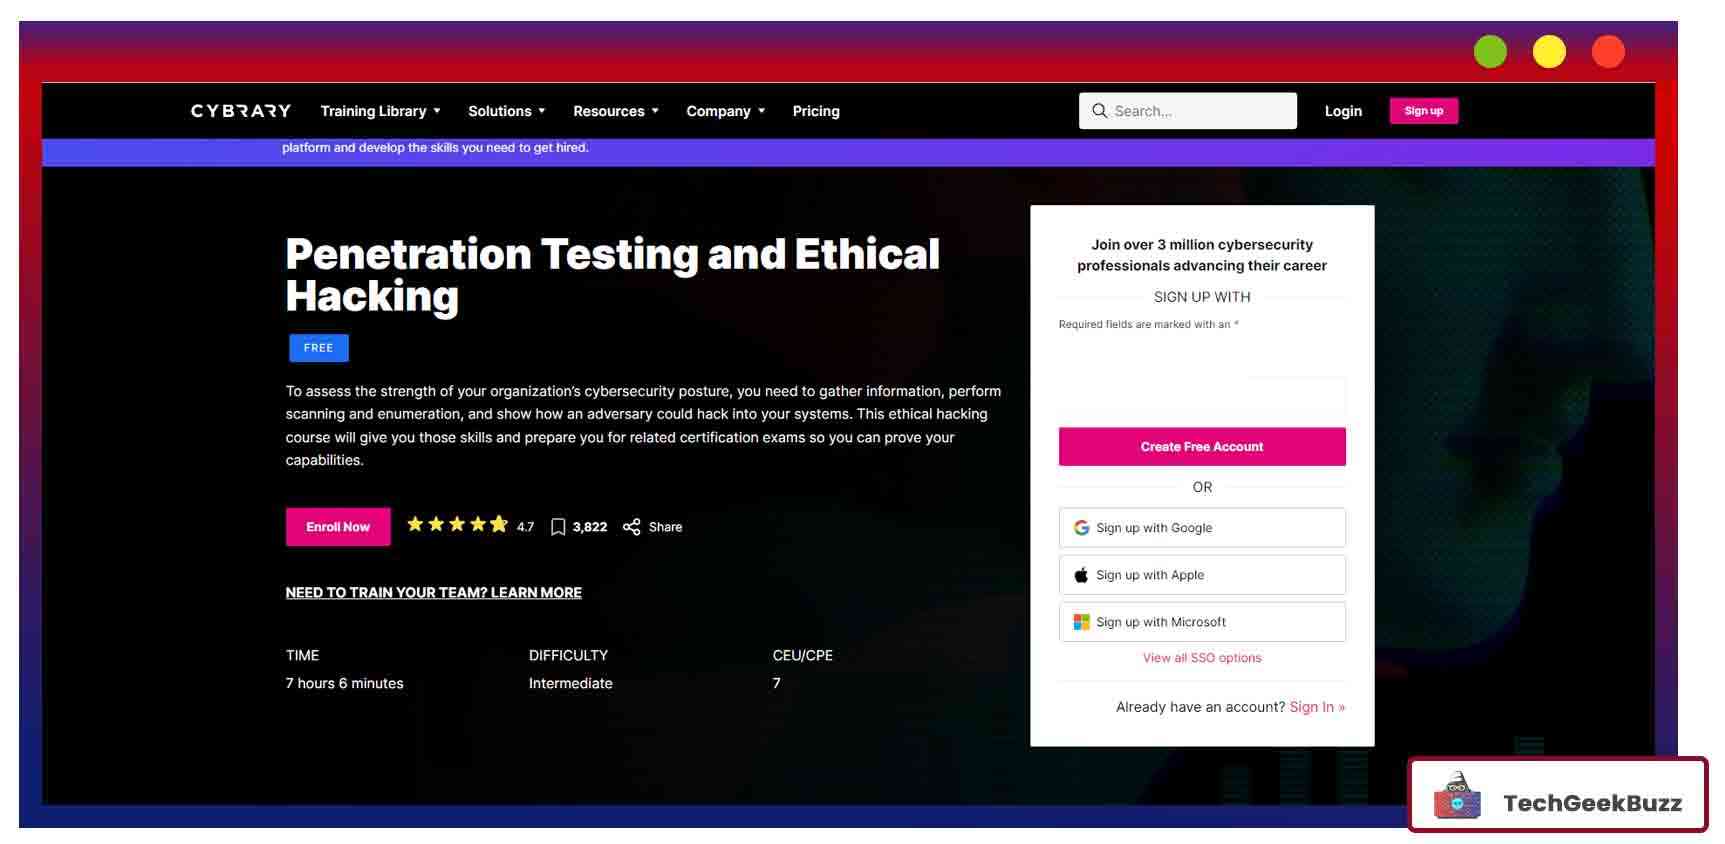 Penetration Testing and Ethical Hacking